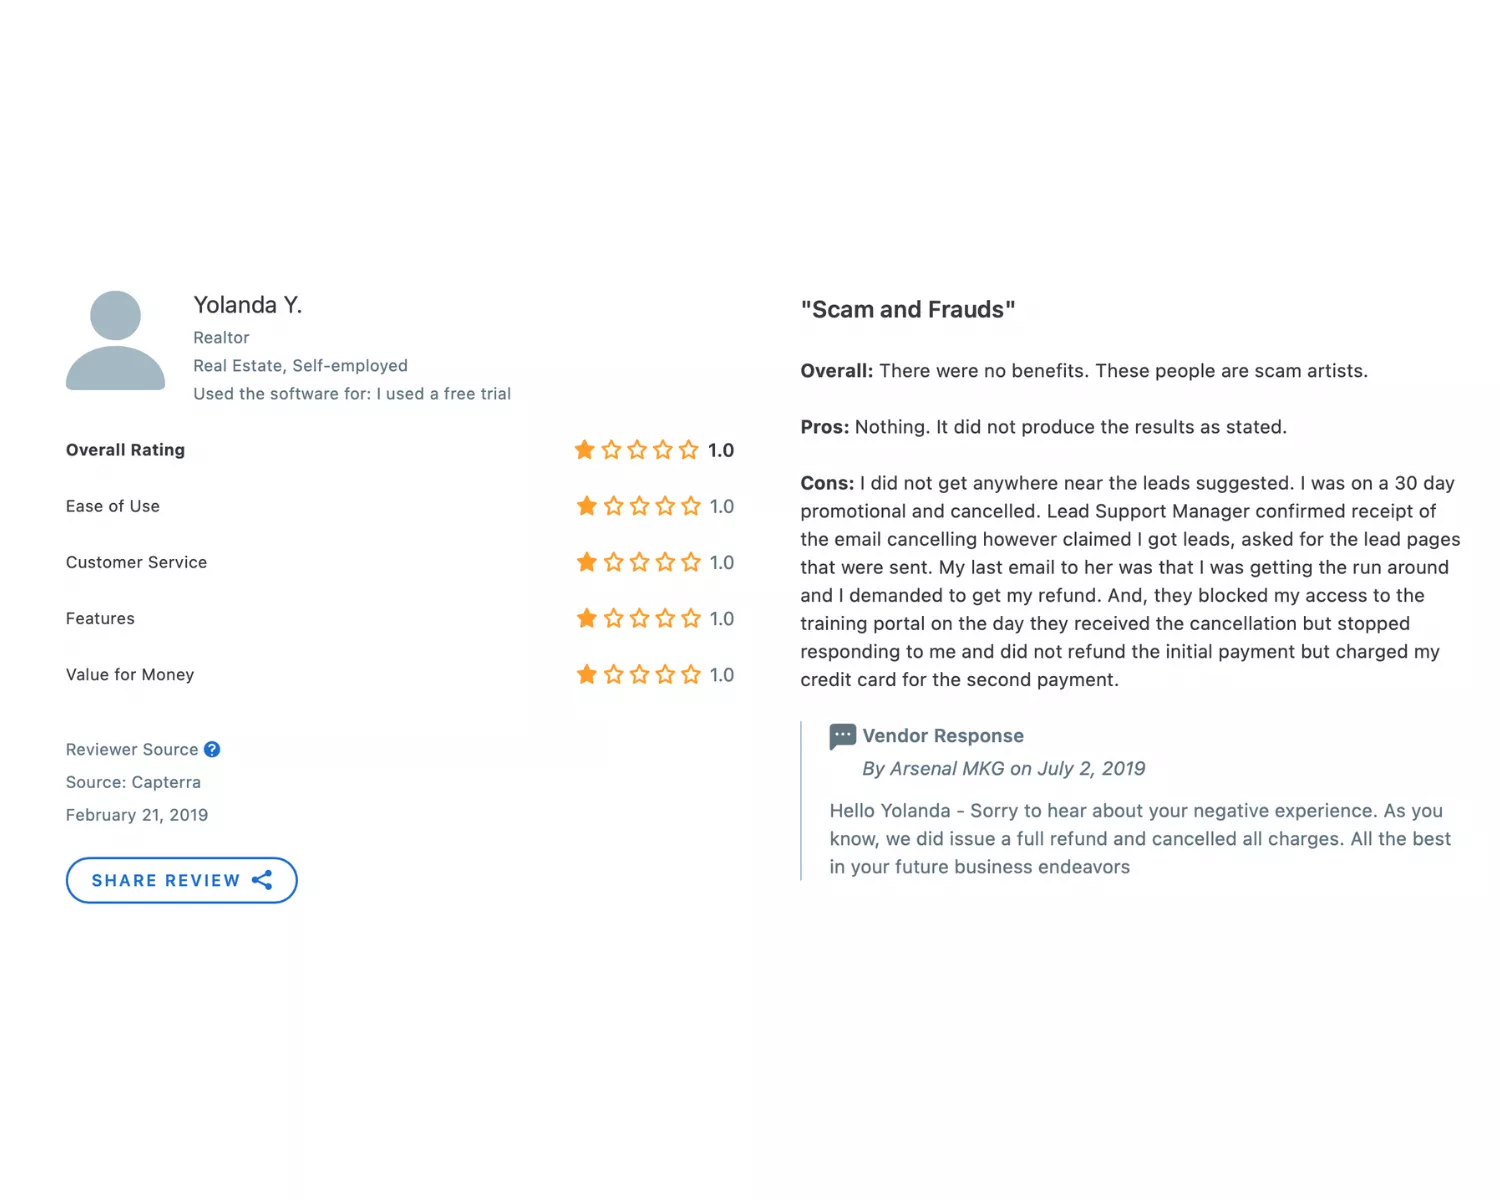 A negative review for Arsenal MKG on Capterra.